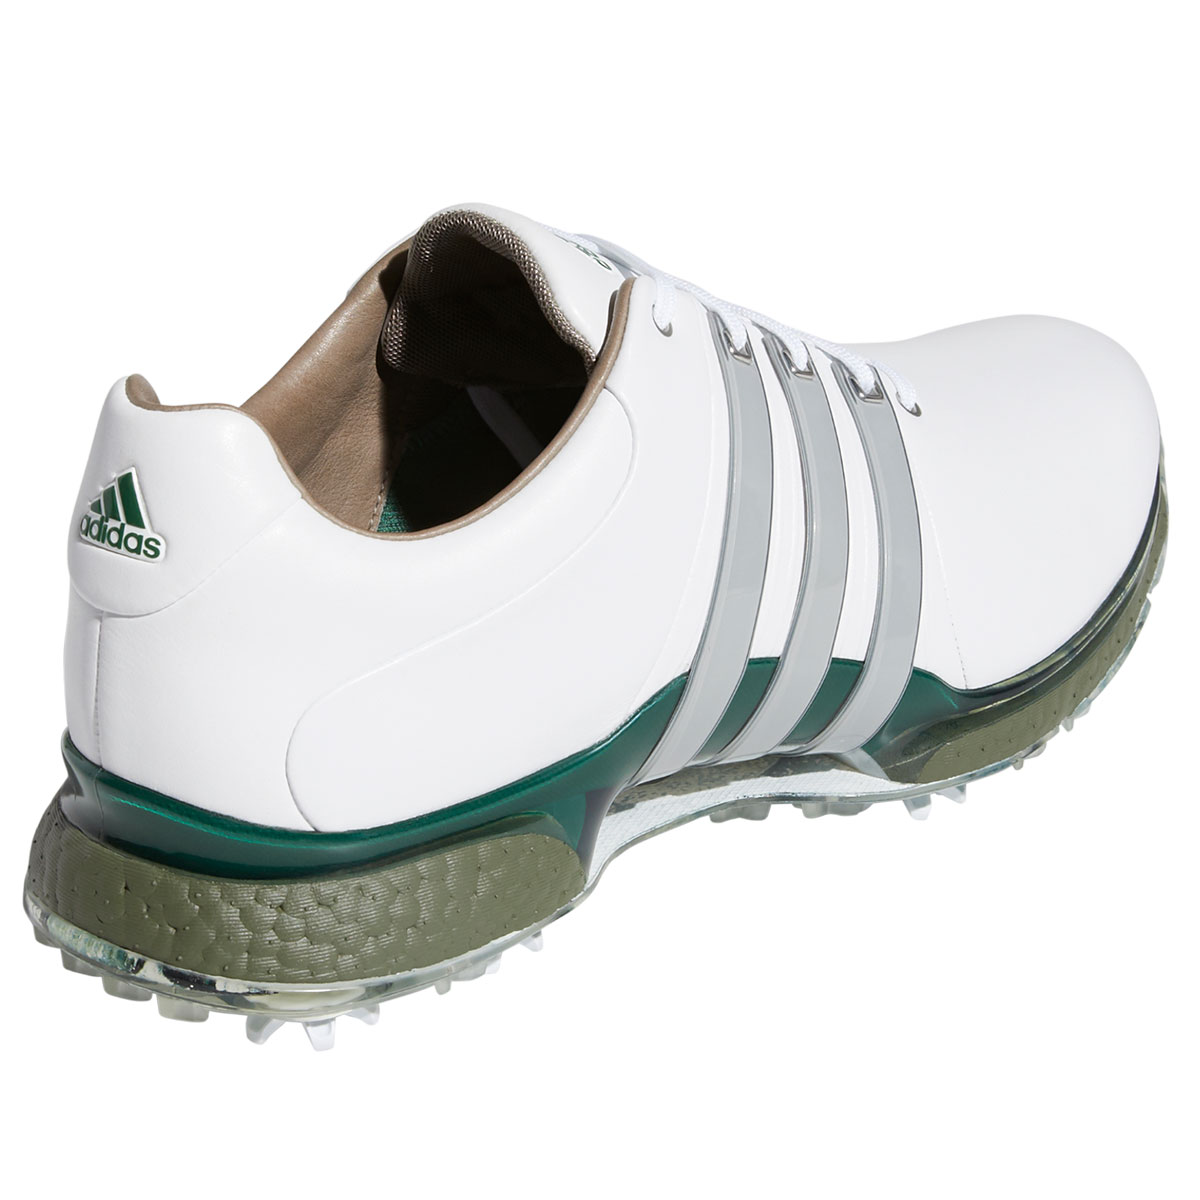 adidas Golf Tour 360 XT Limited Edition Shoes from american golf